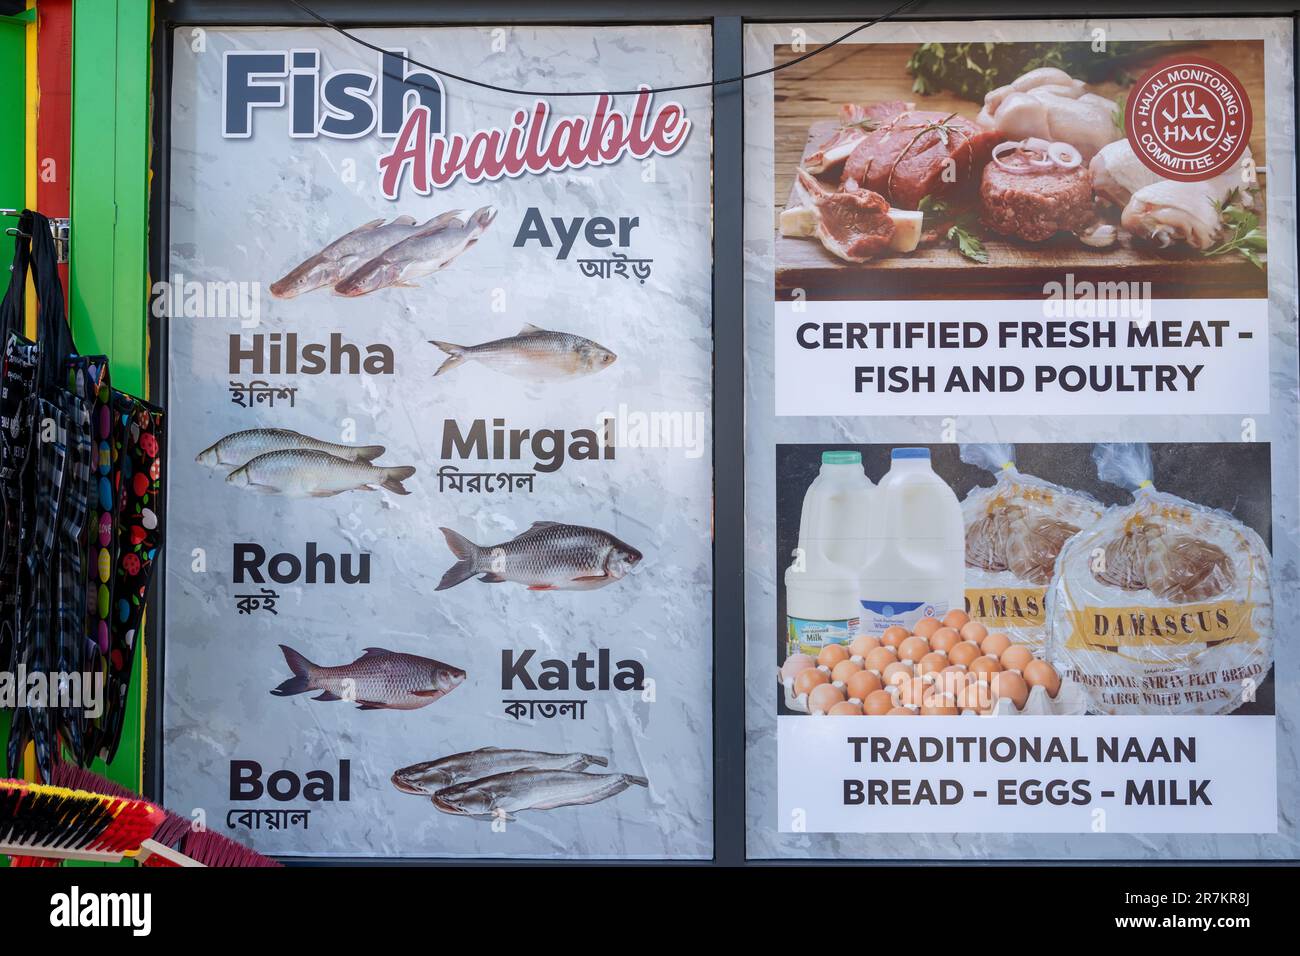 A sign outside of a shop shows the fish available - Ayer, Hilsha, Mirgal, Rohu, Katla and Boal, as well as halal meat. Newcastle upon Tyne, UK. Stock Photo